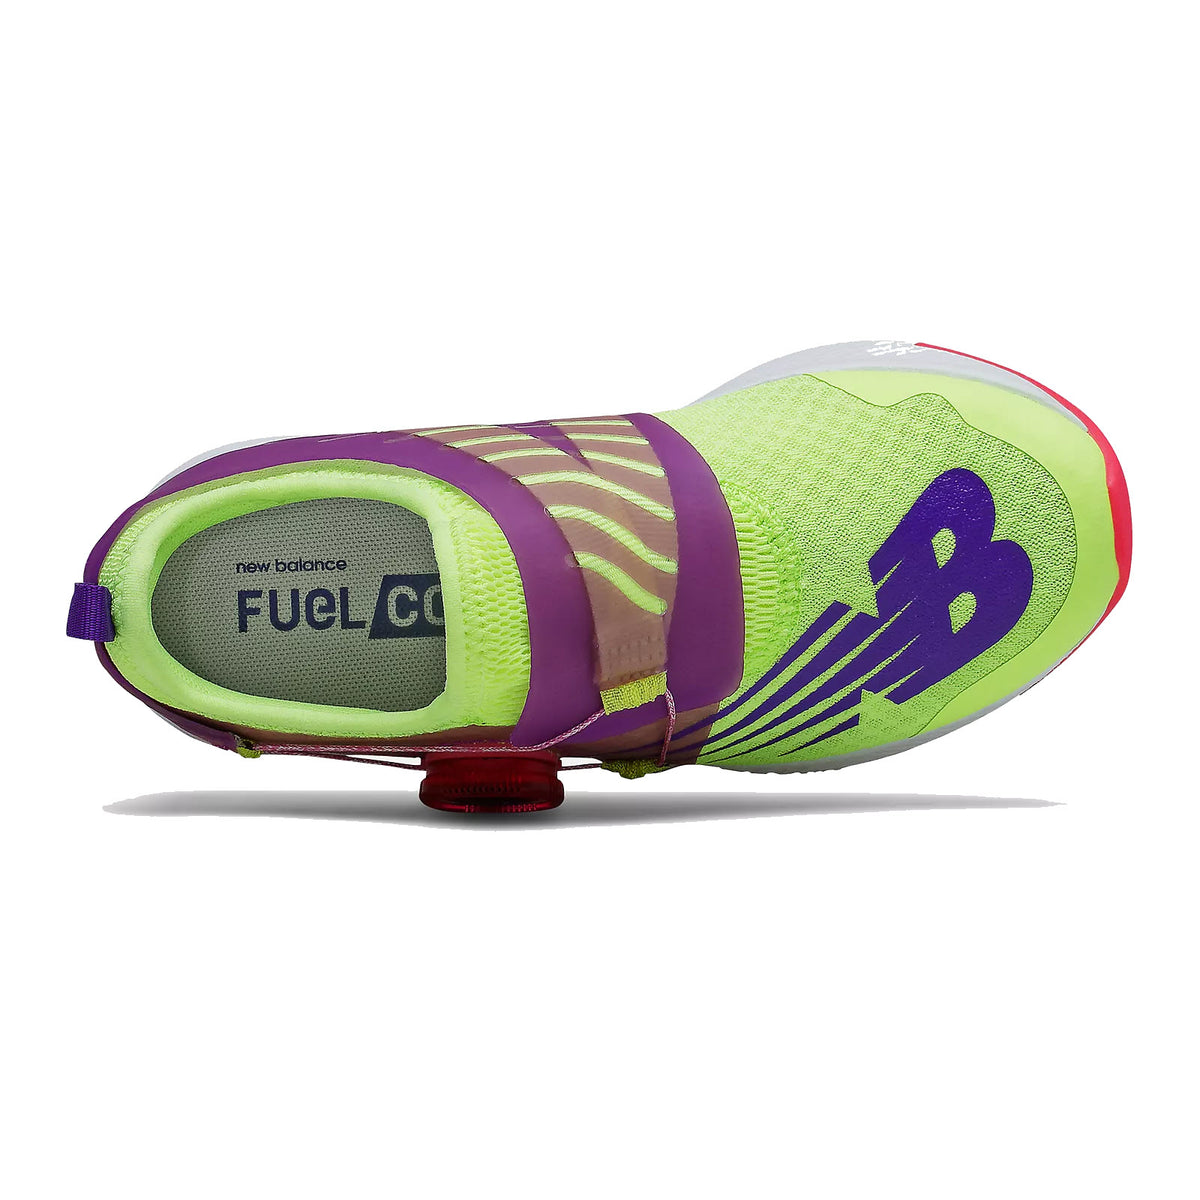 Brightly colored New Balance FuelCore Reveal Boa Lime/Pink running shoe with fuelcell technology, viewed from above.